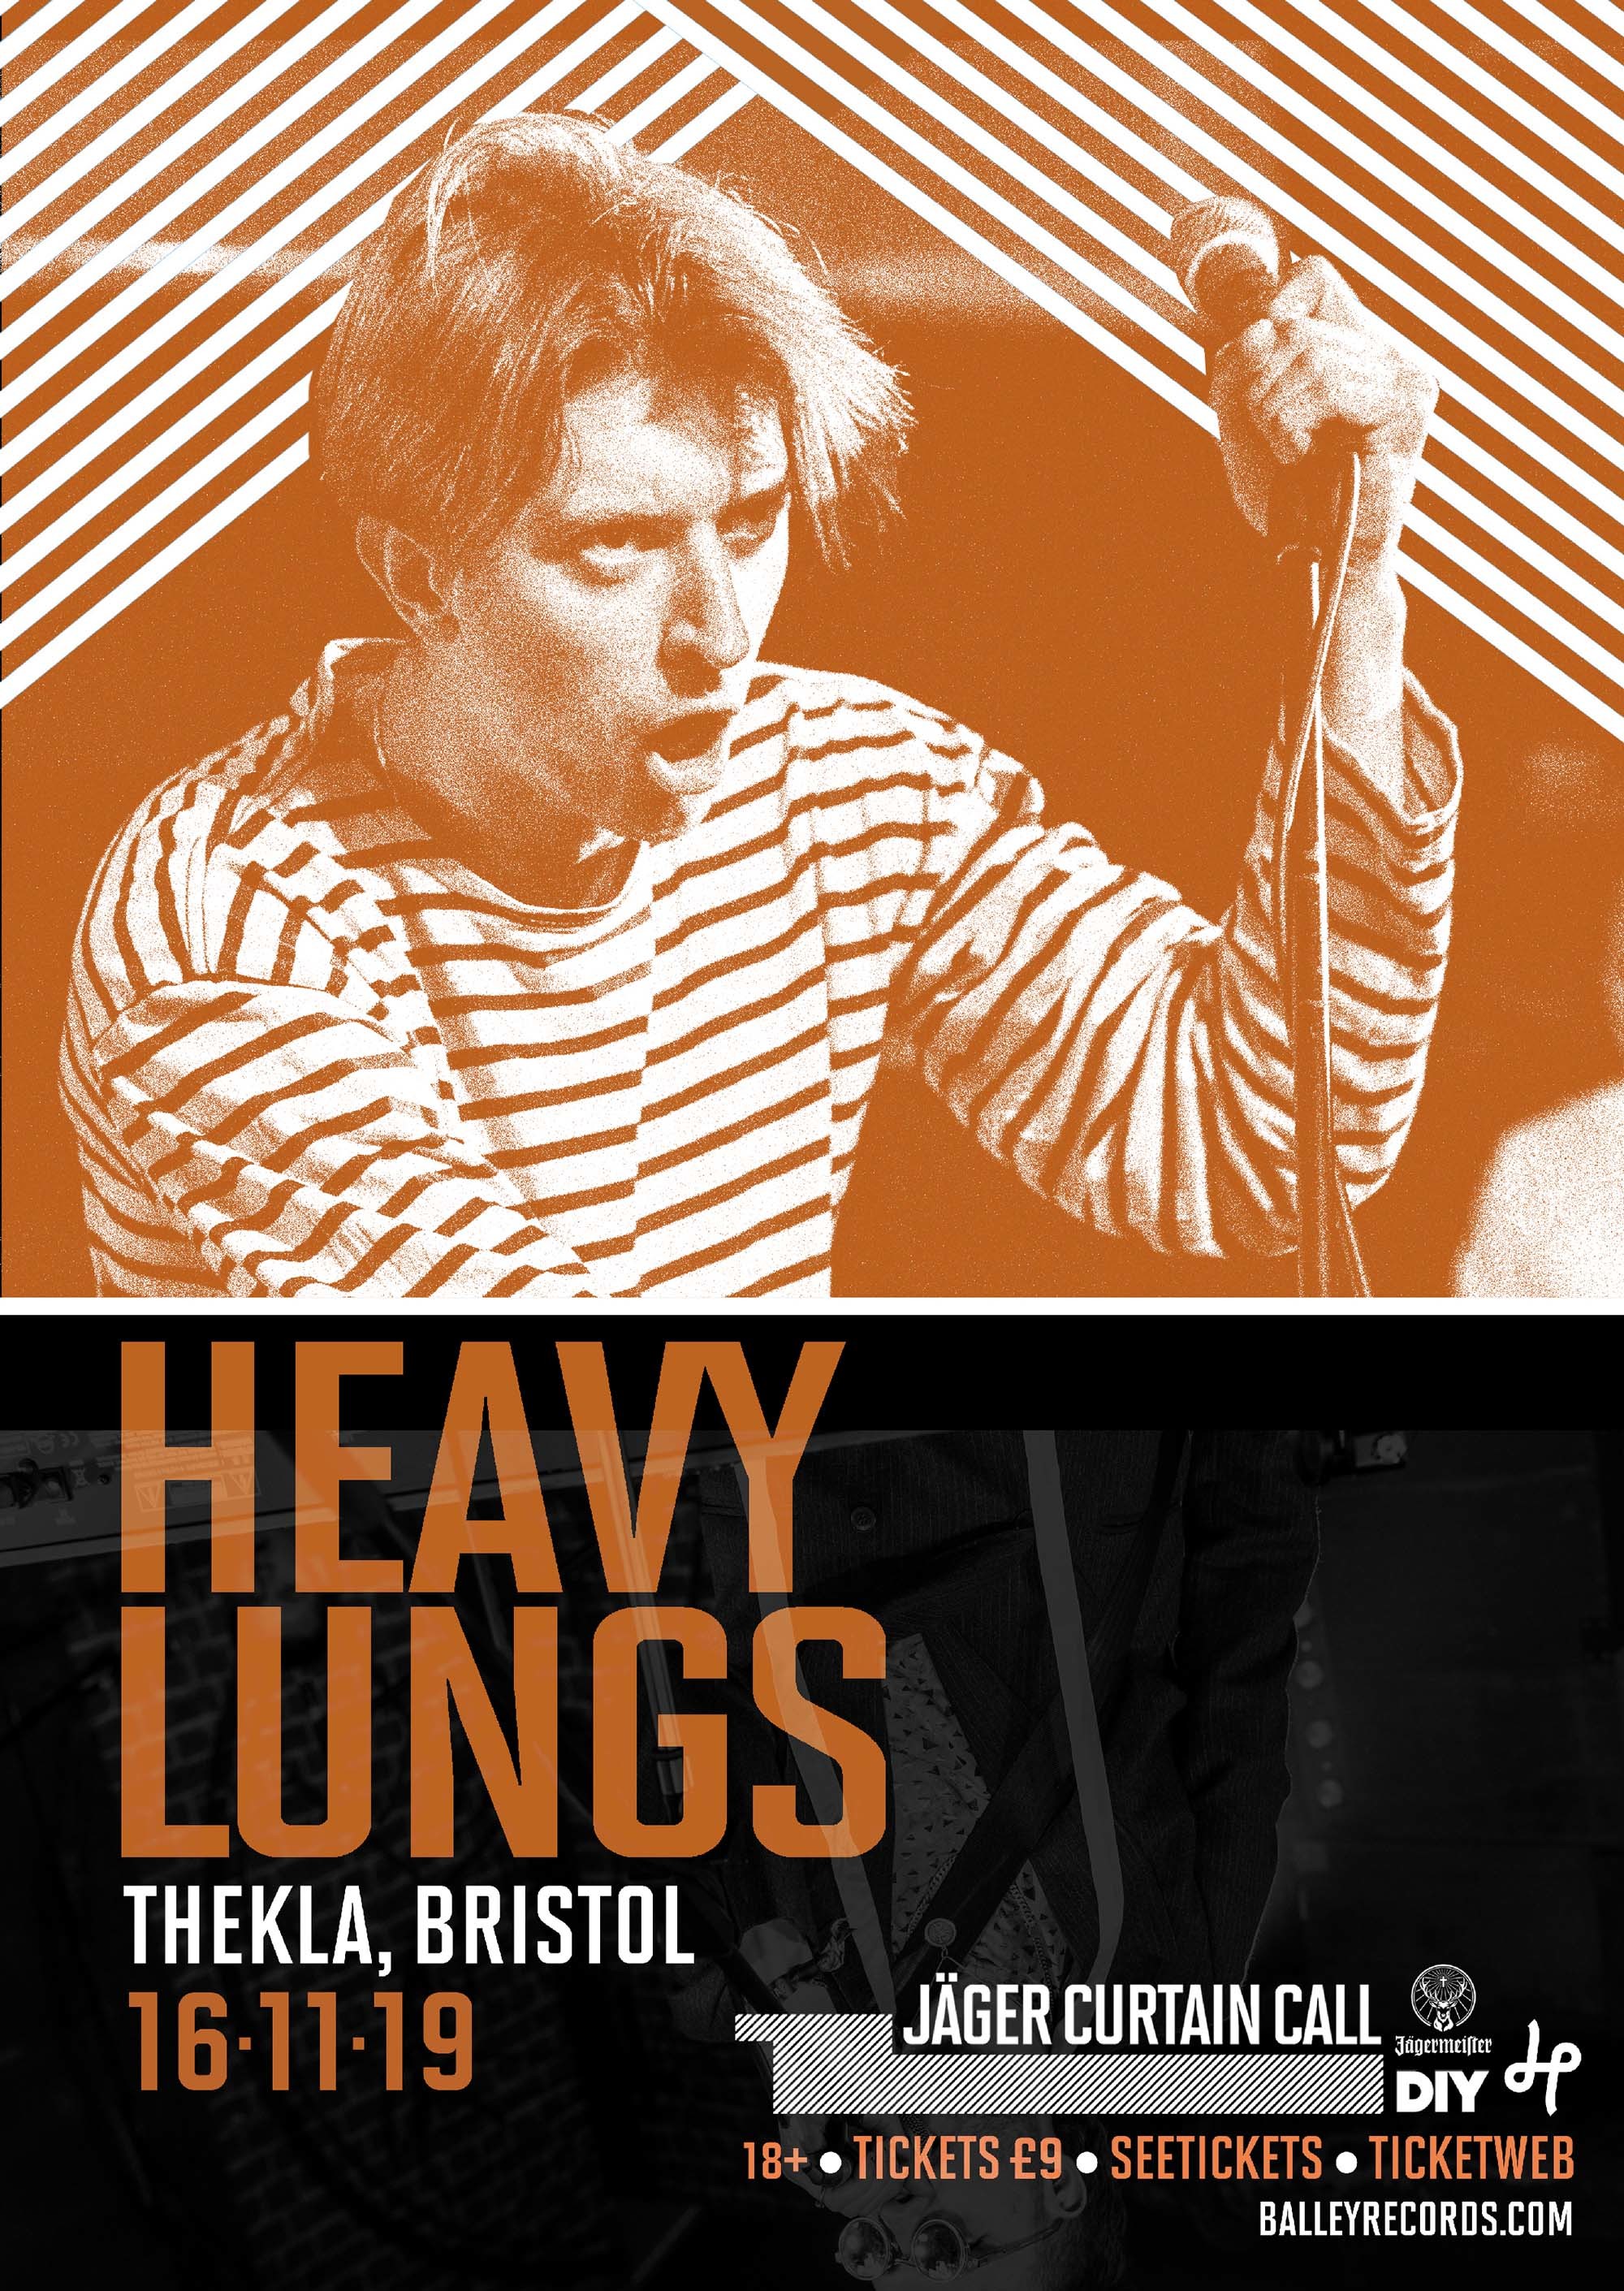 Heavy Lungs announce EP 'Measure' and UK/European tour